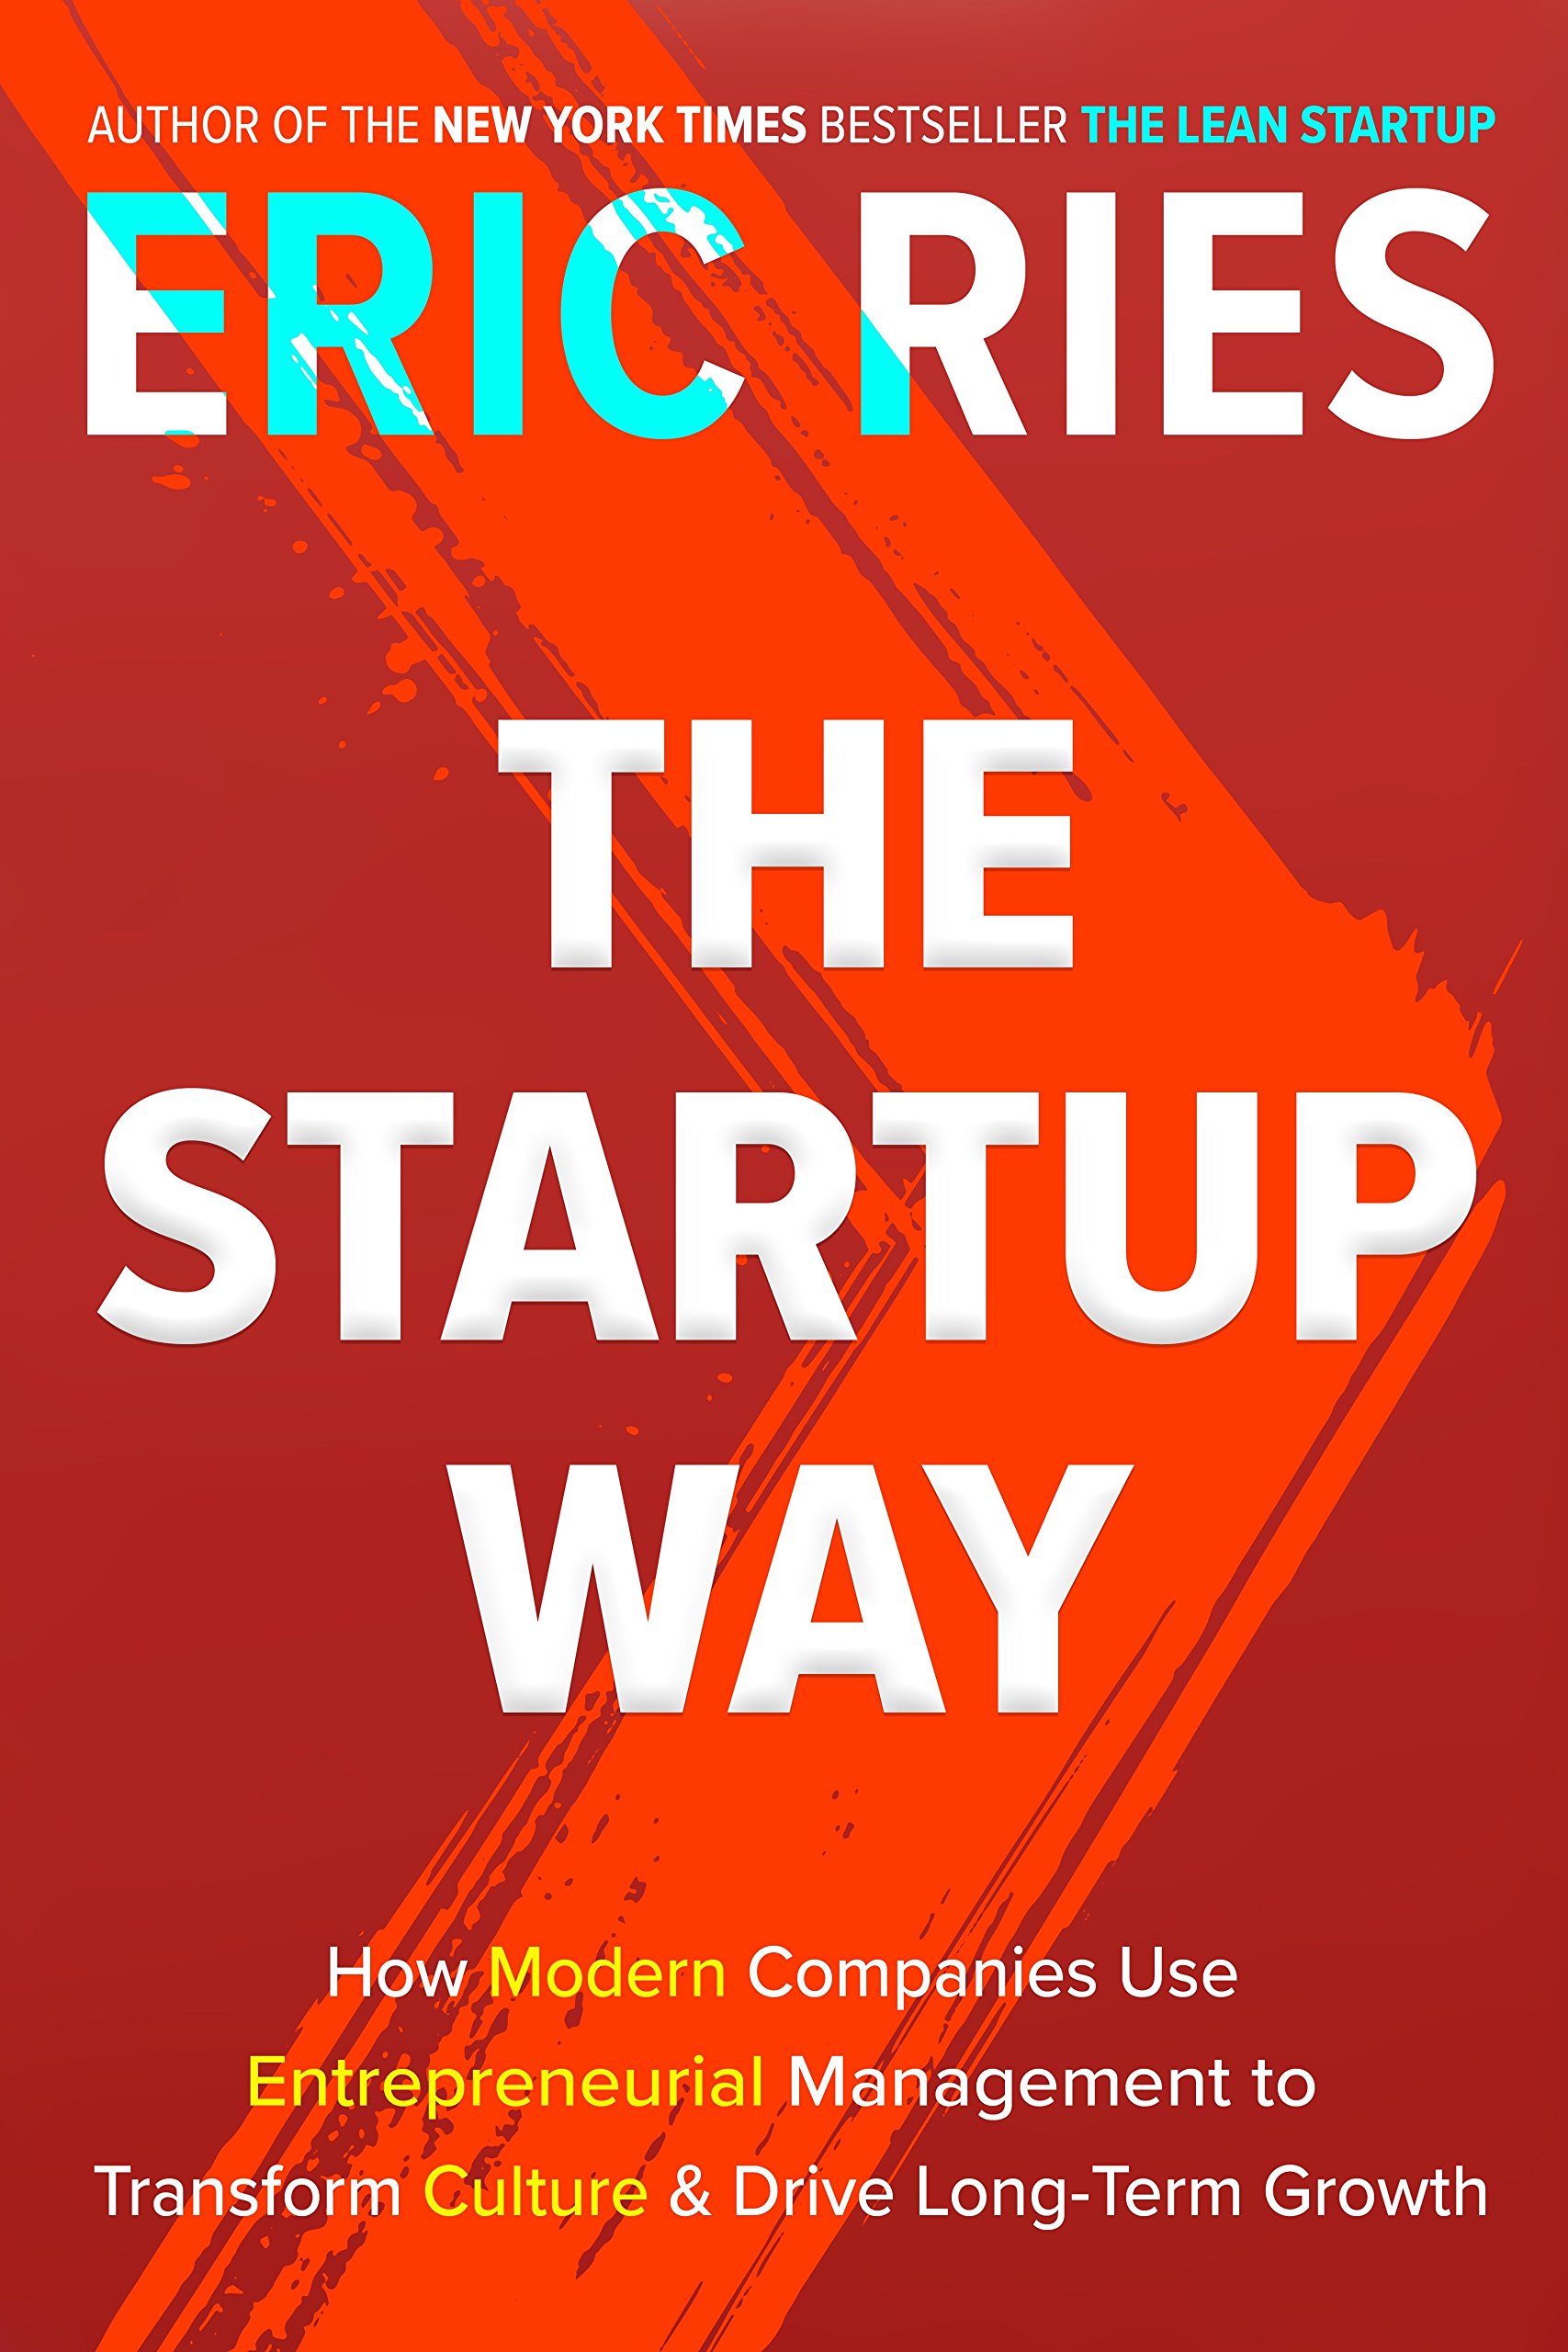 The startup way  by Eric Ries